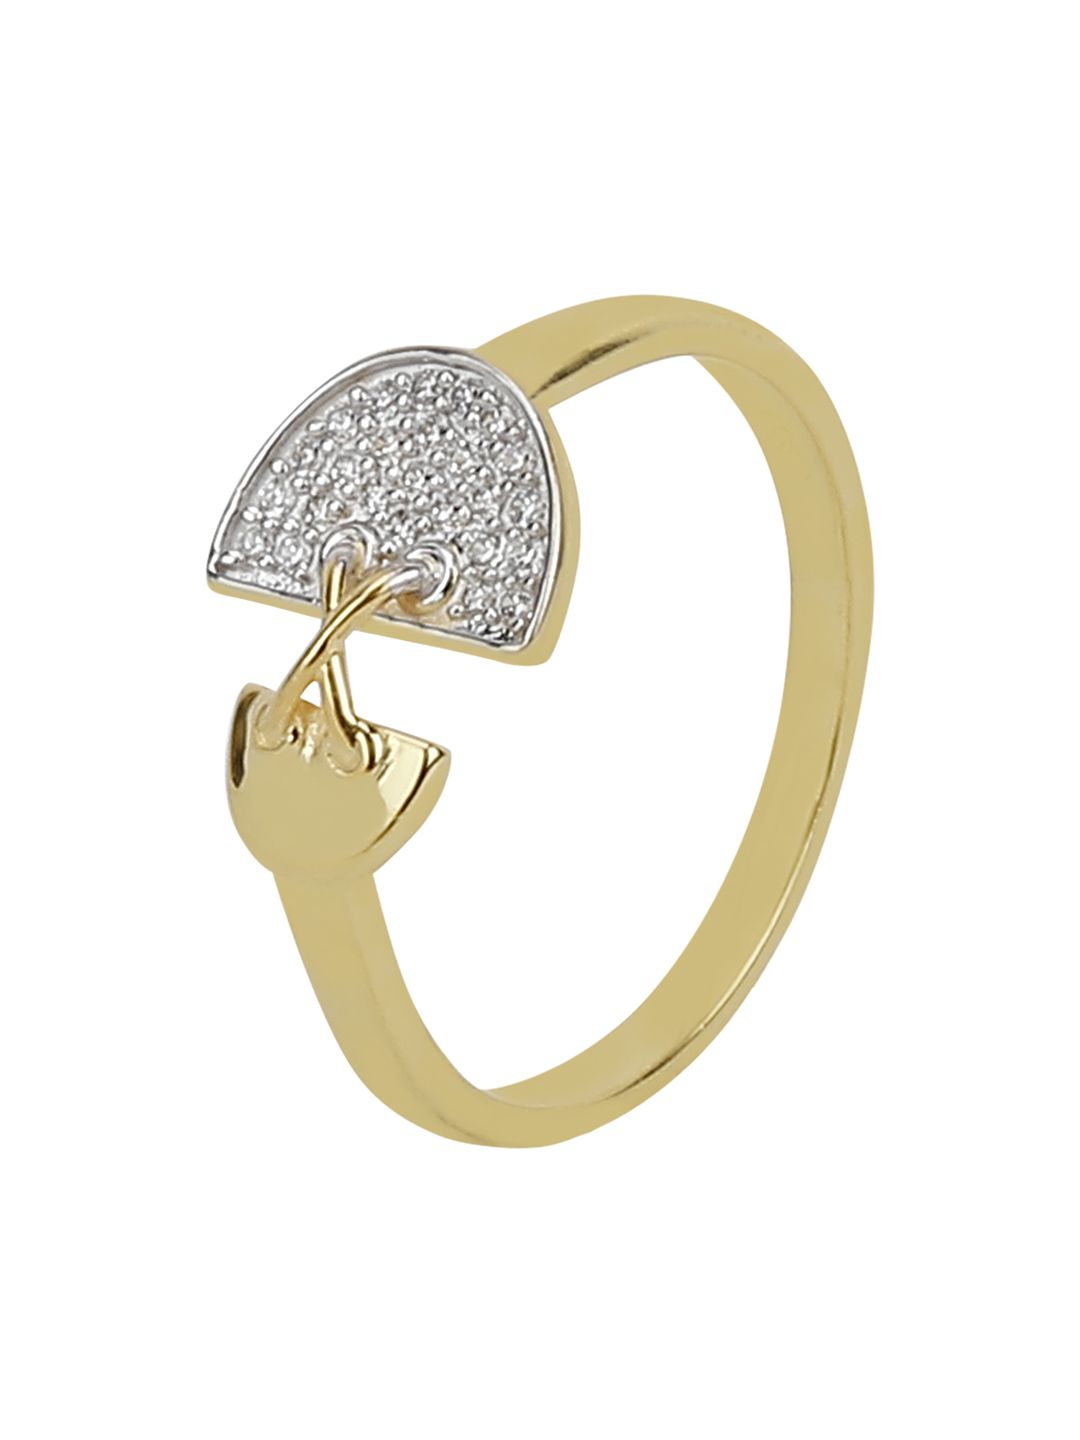 Silgo Women 925 Sterling Silver Gold-Plated & White CZ-Studded Finger Ring Price in India